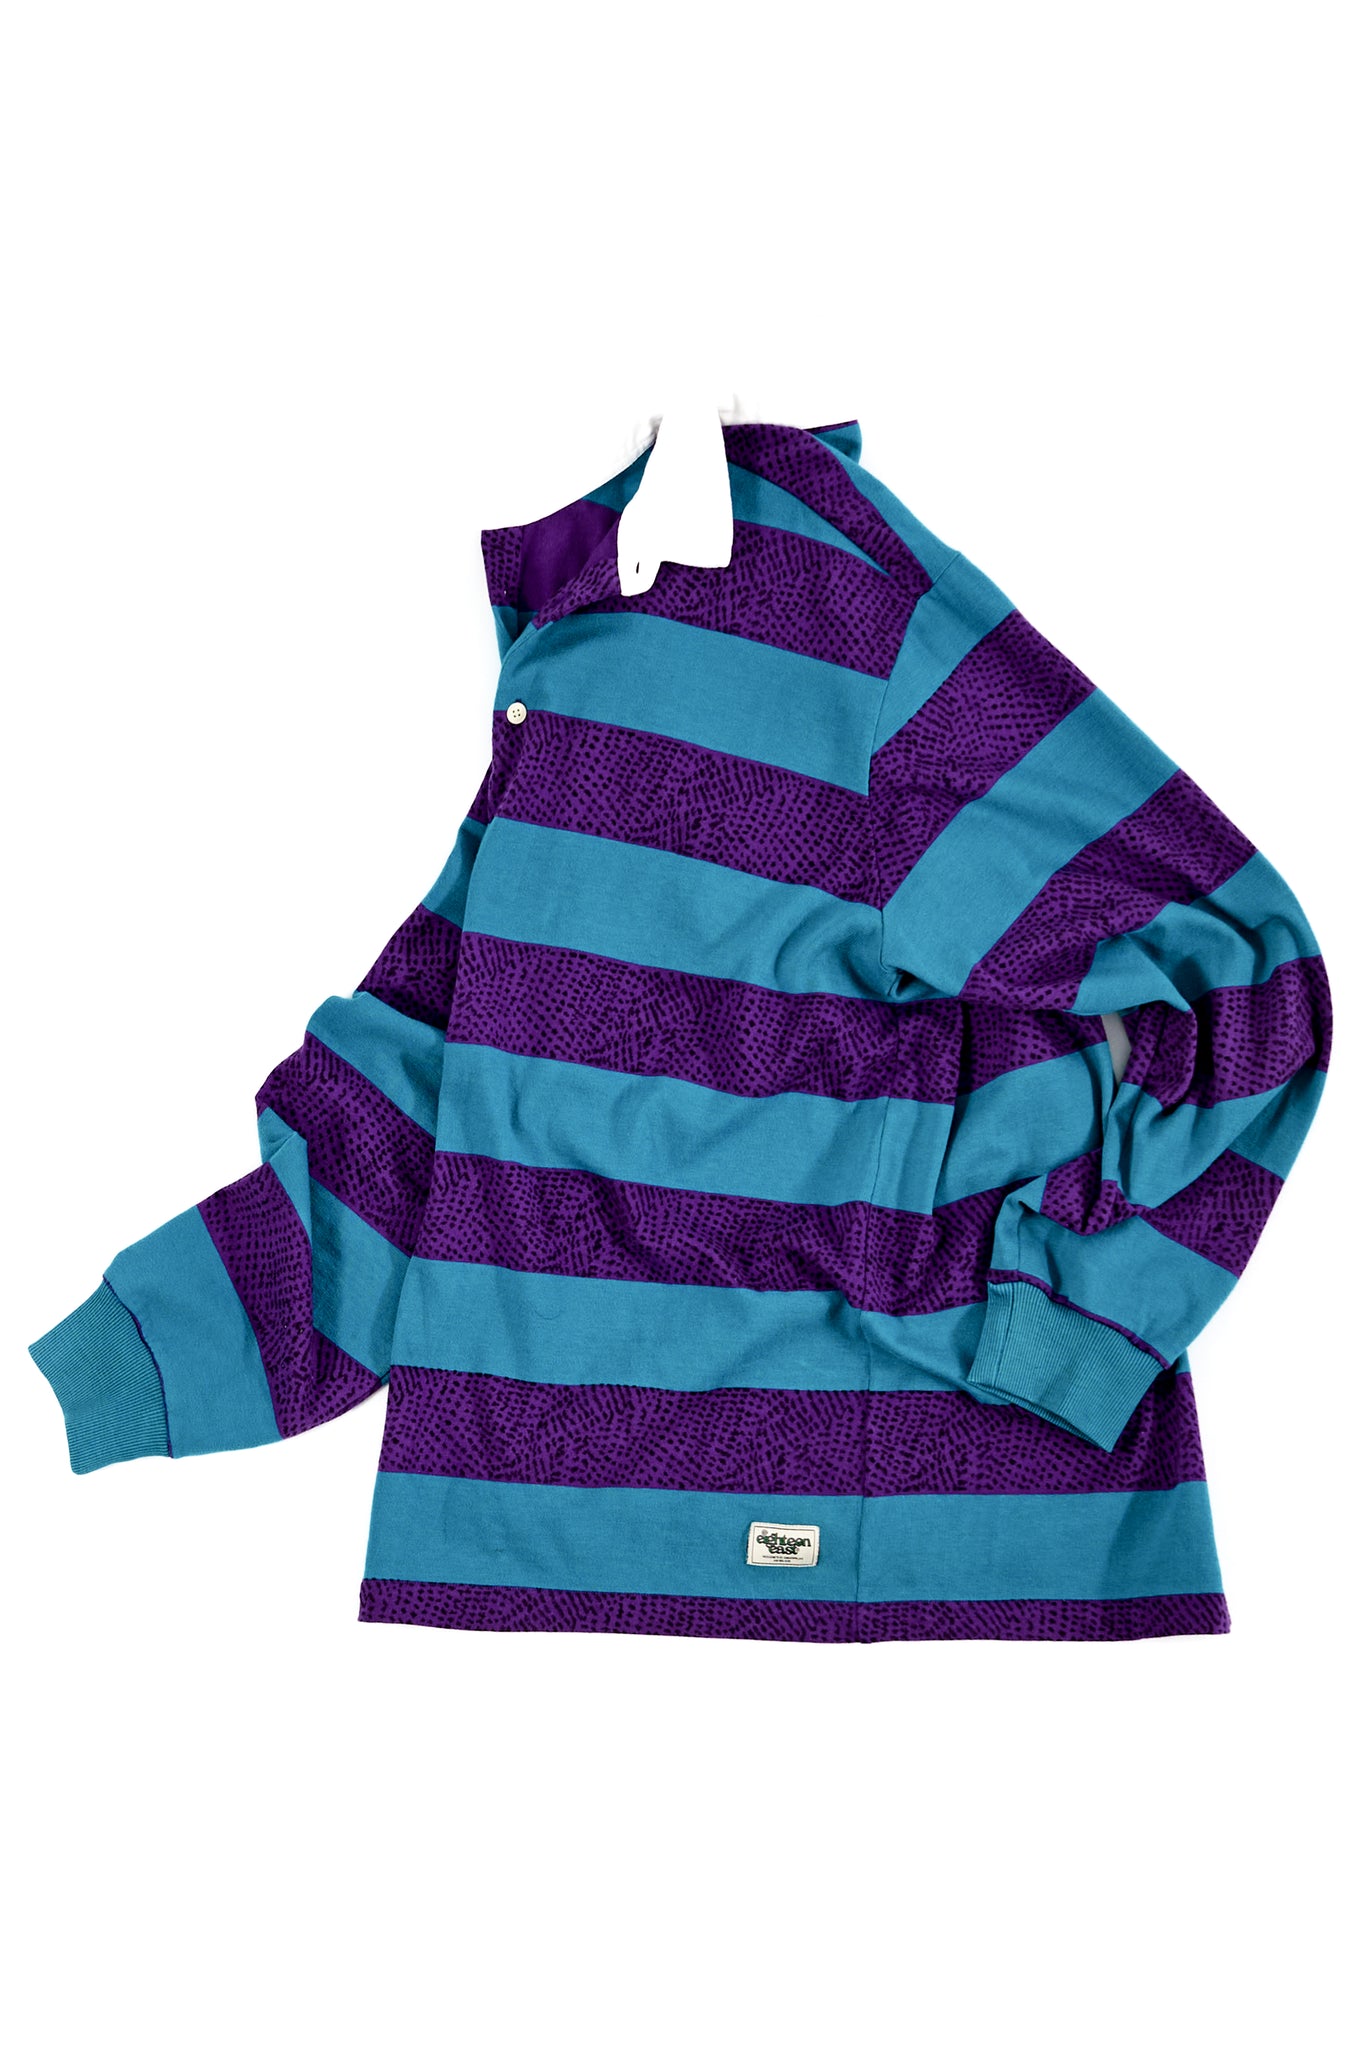 FISKE L/S RUGBY - TEAL / PURPLE COTTON PRACTICE JERSEY